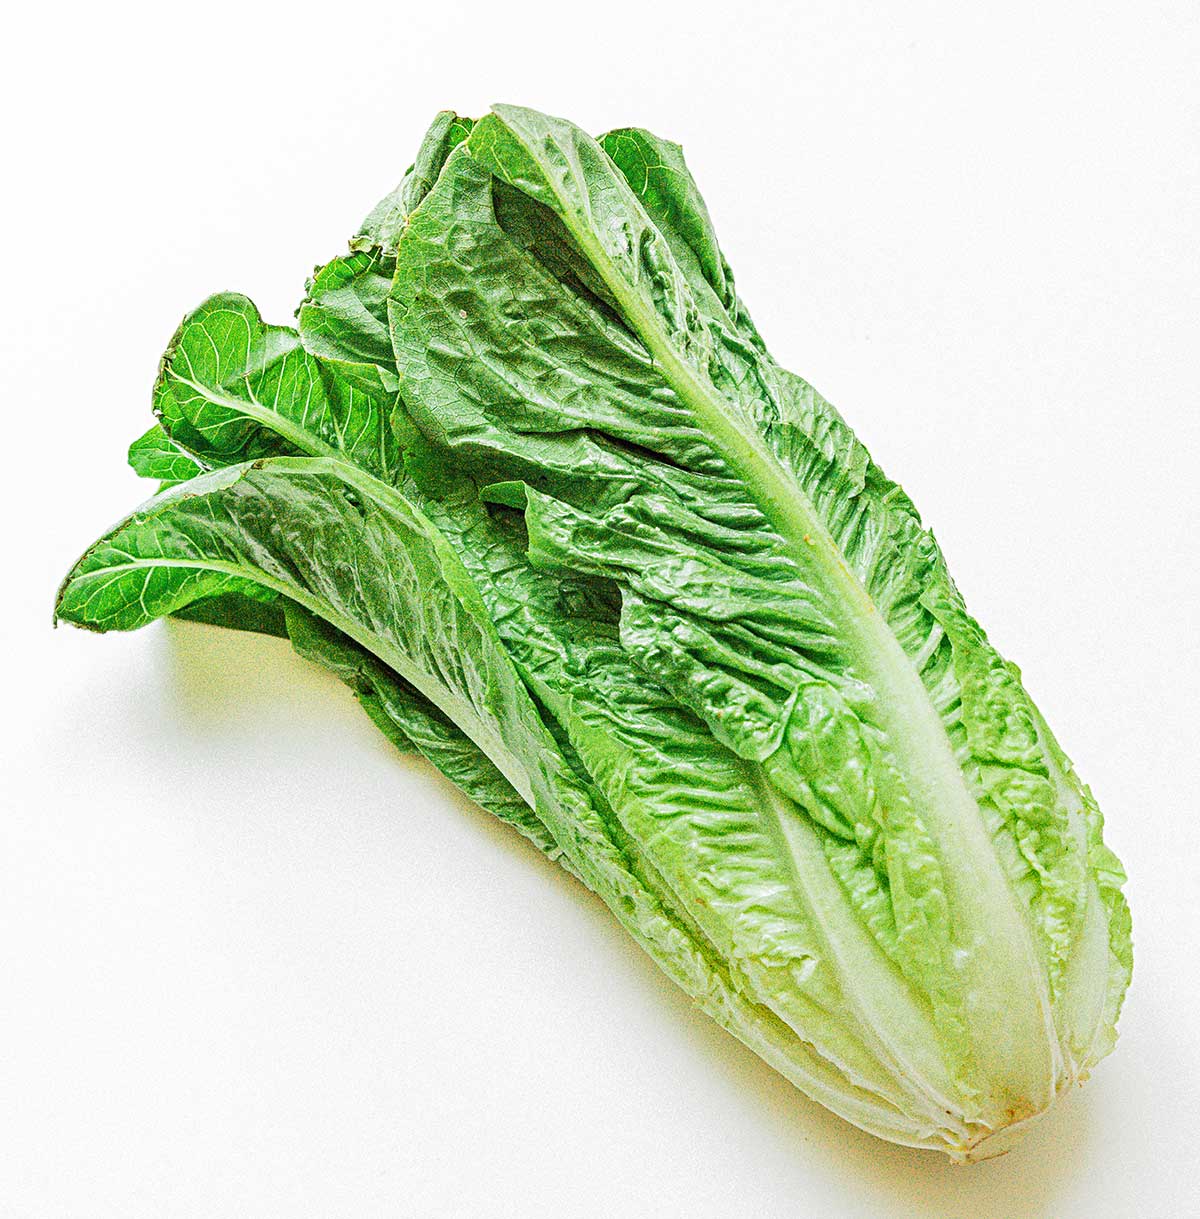 Romaine lettuce on a white background.